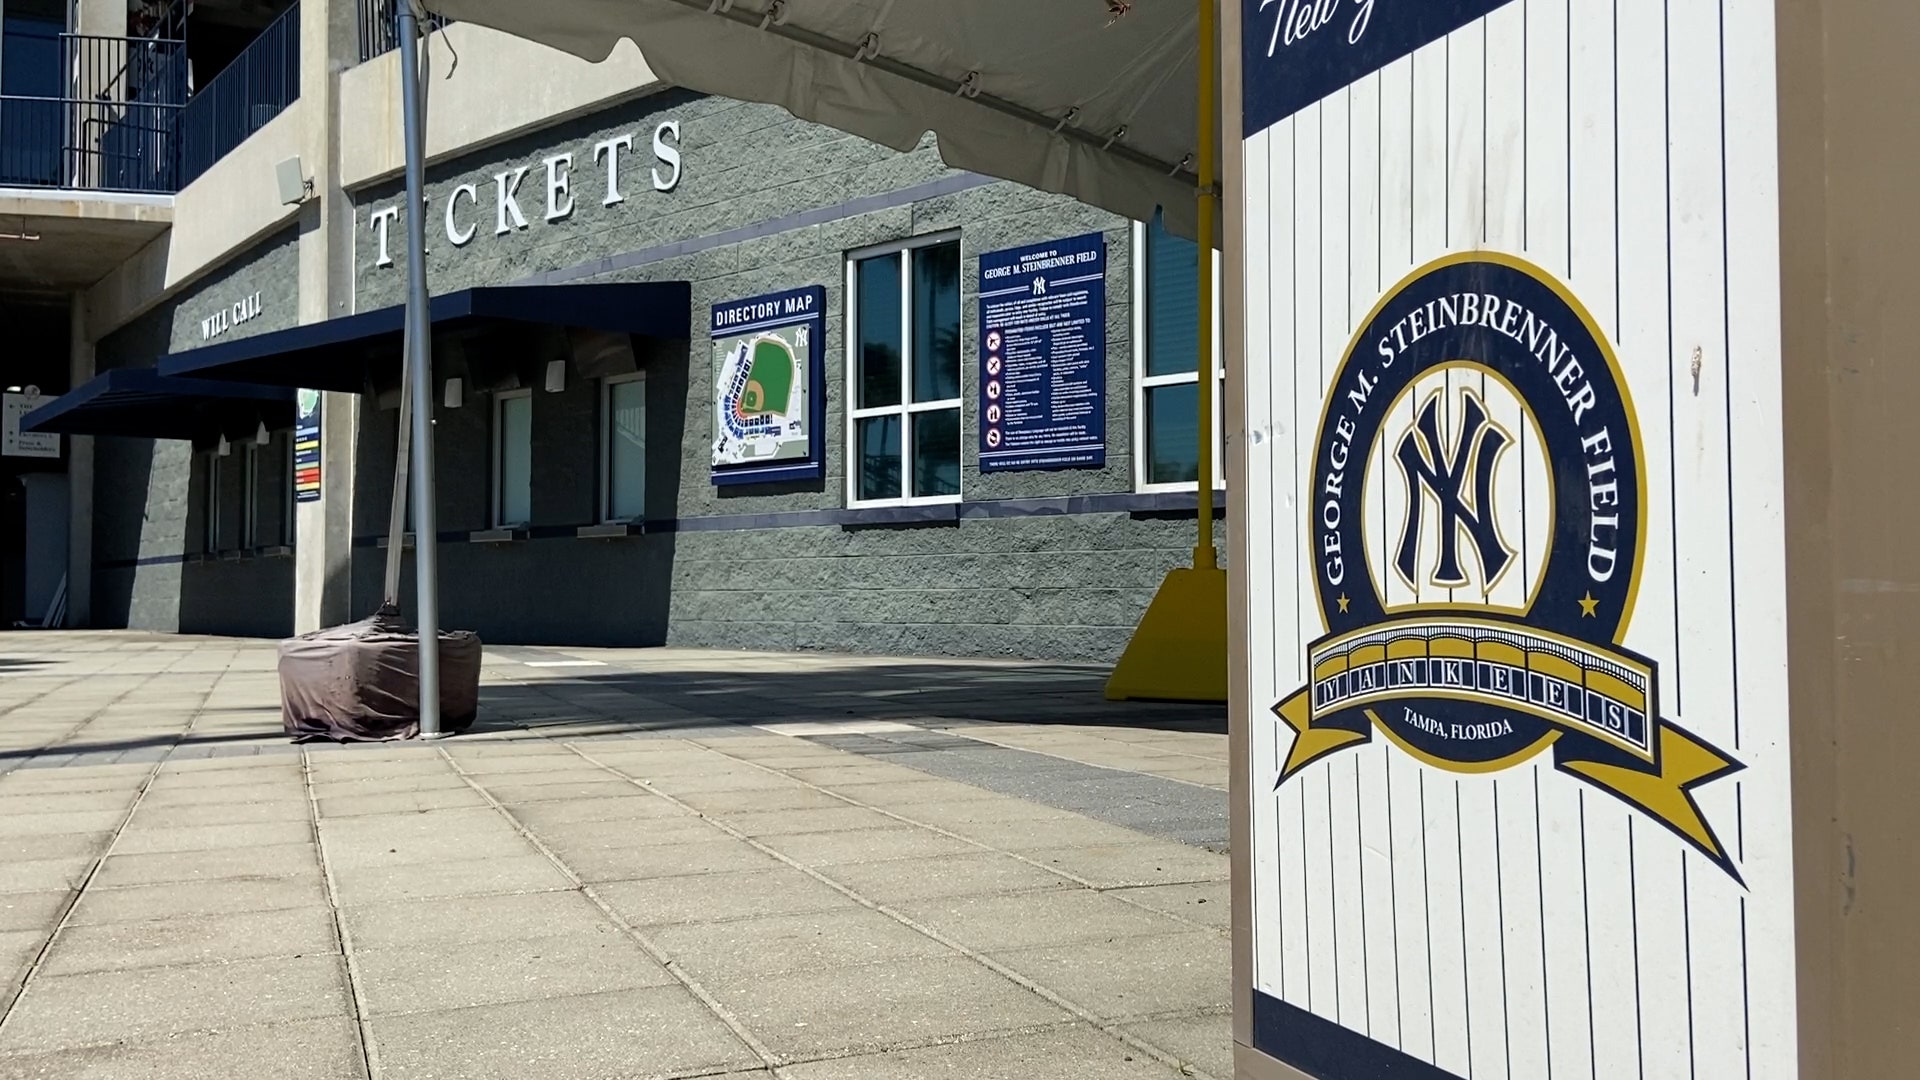 Spring training's postponement impacts small businesses, ballpark employees